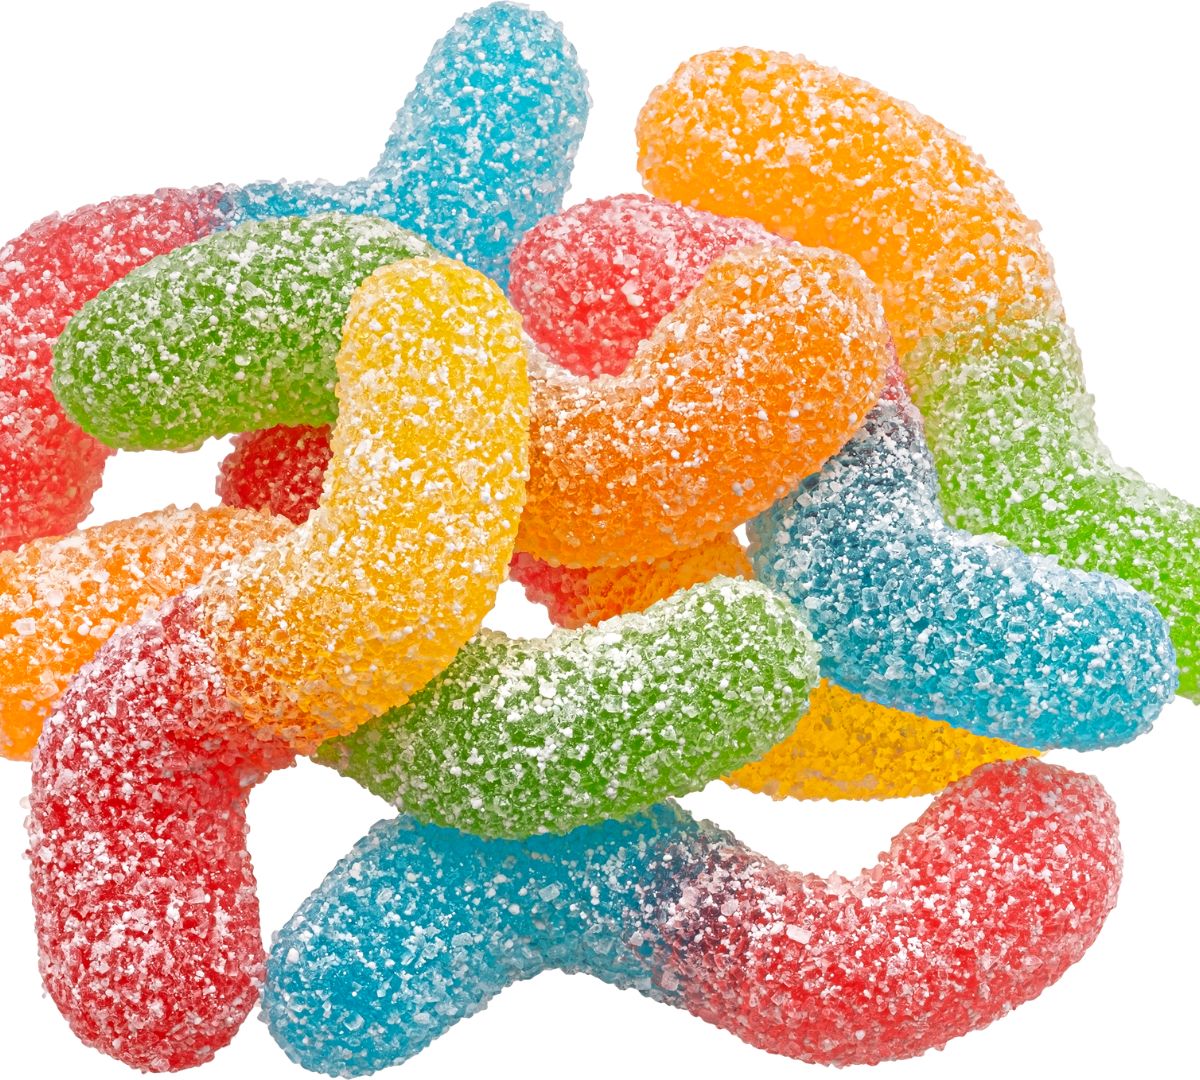 The Best Delta 9 Gummies Selections For Cannabis